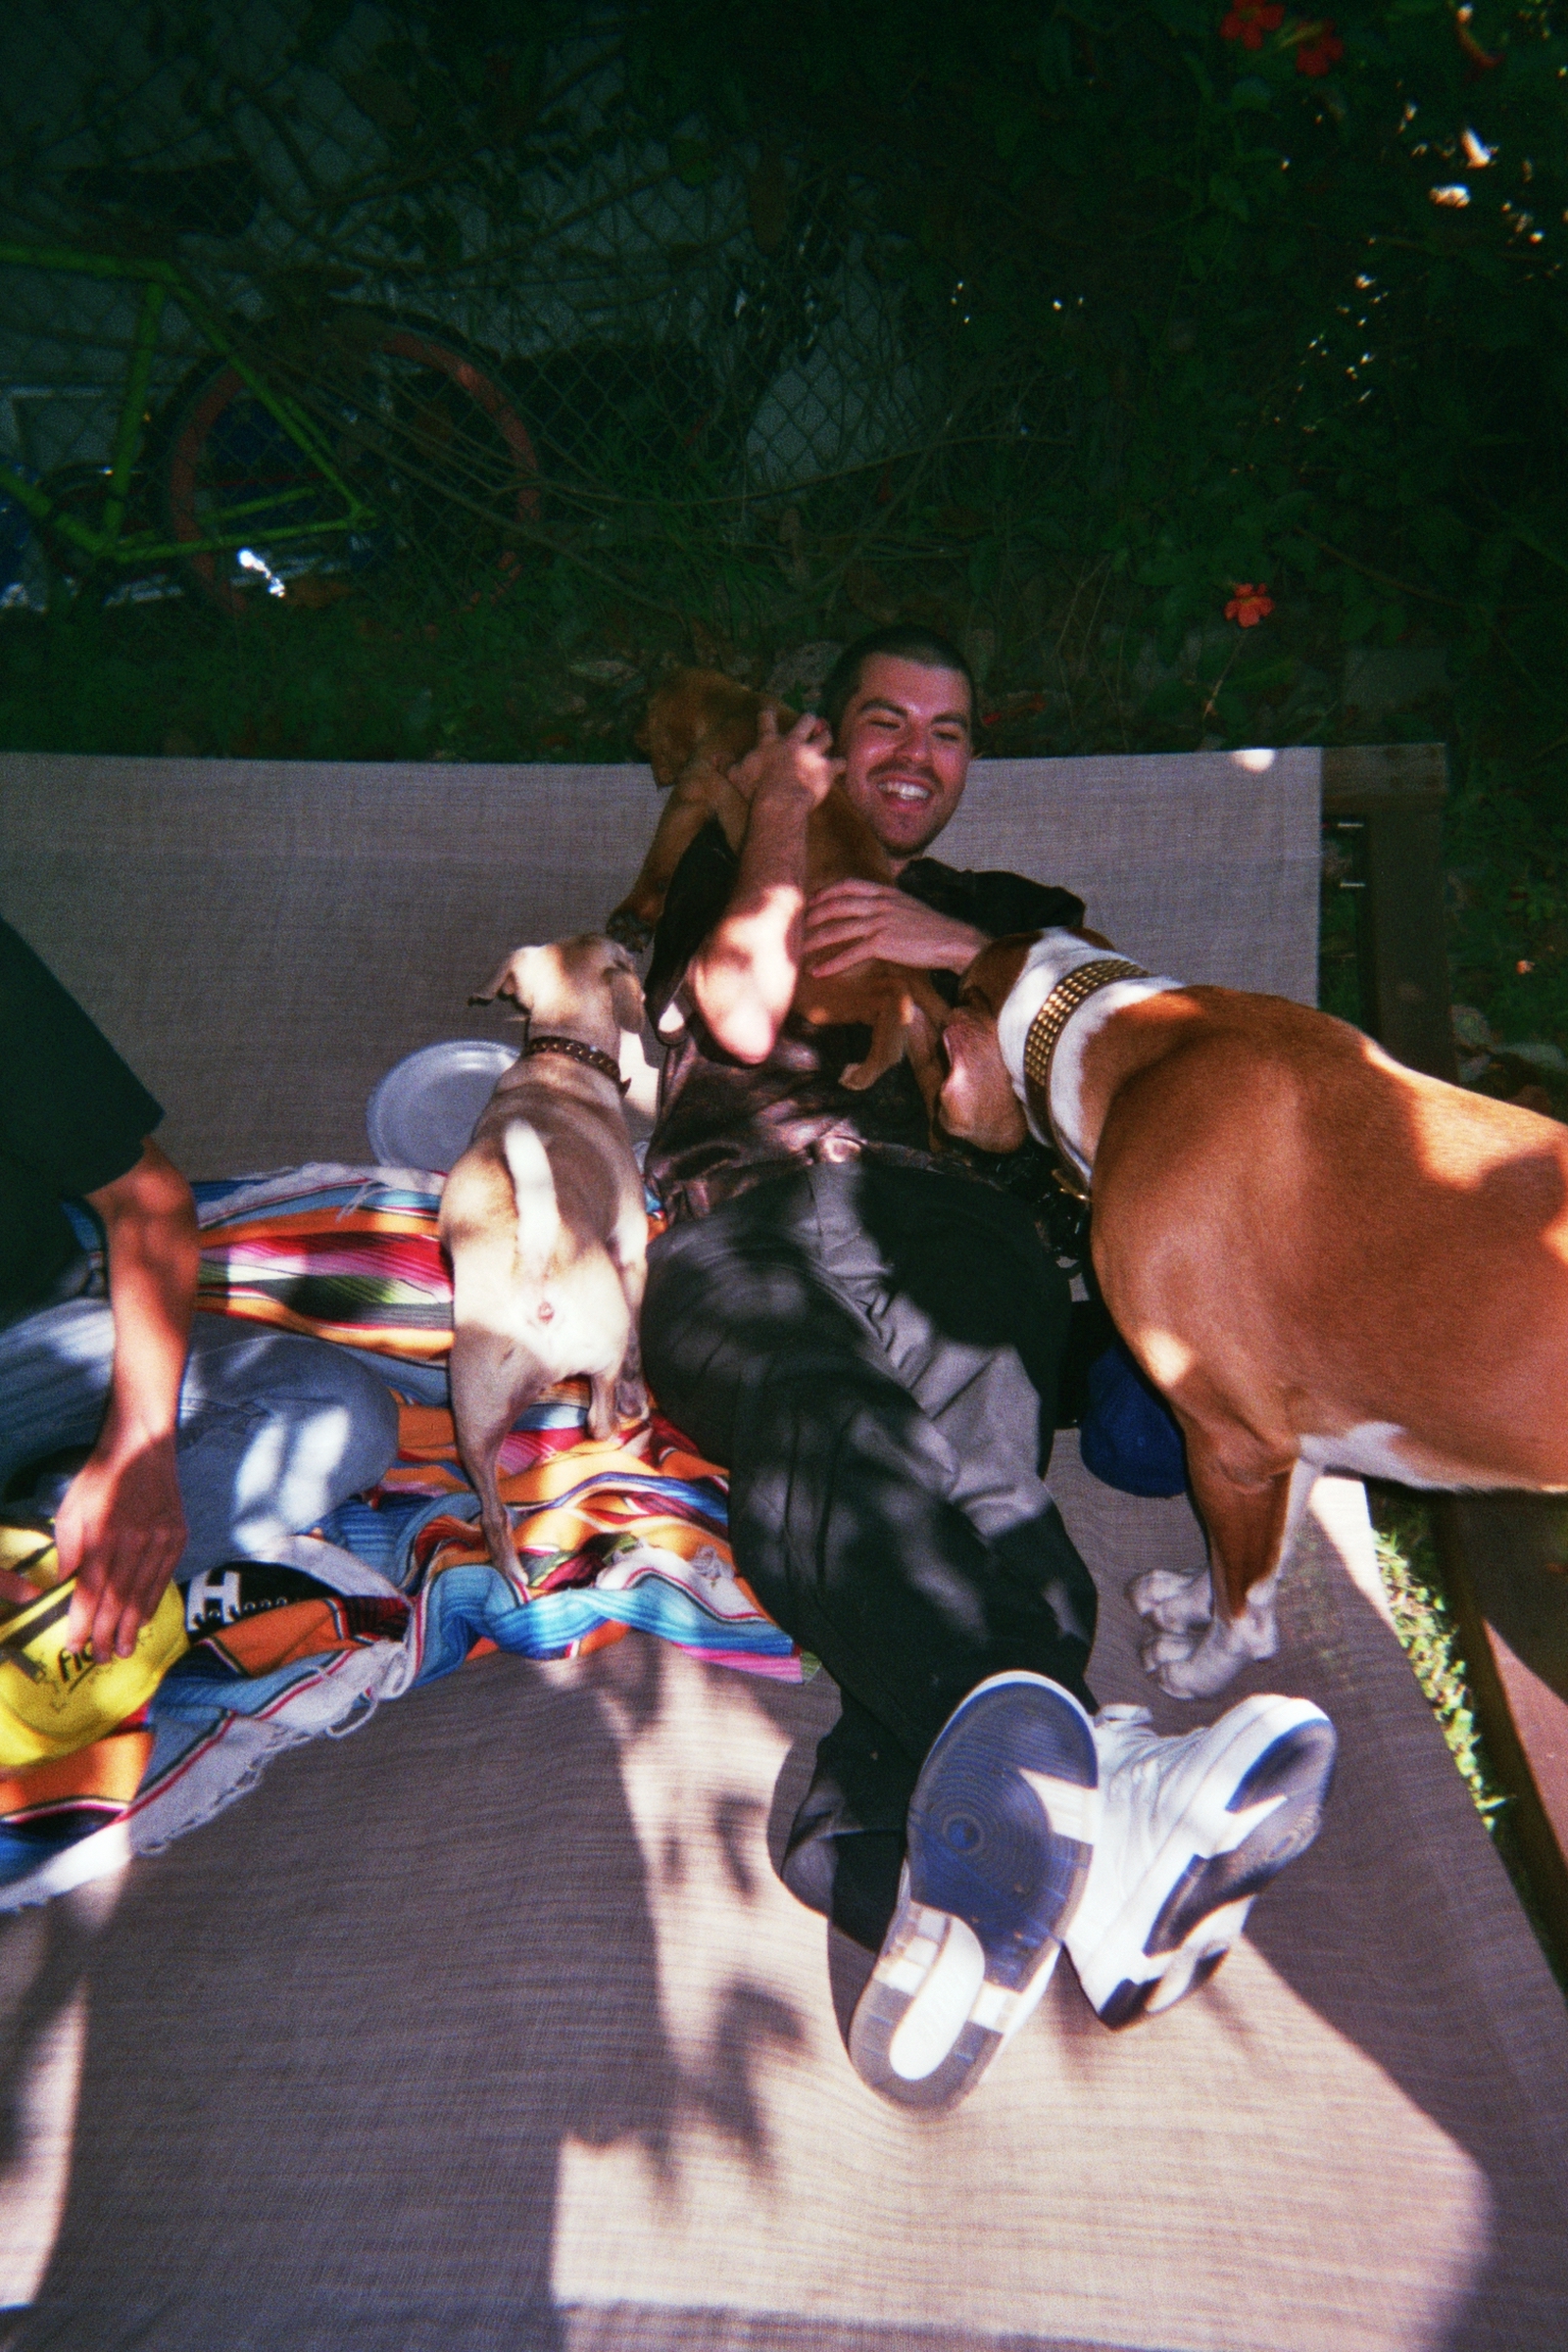 See the world through @throwawaycam's disposable cameras - i-D